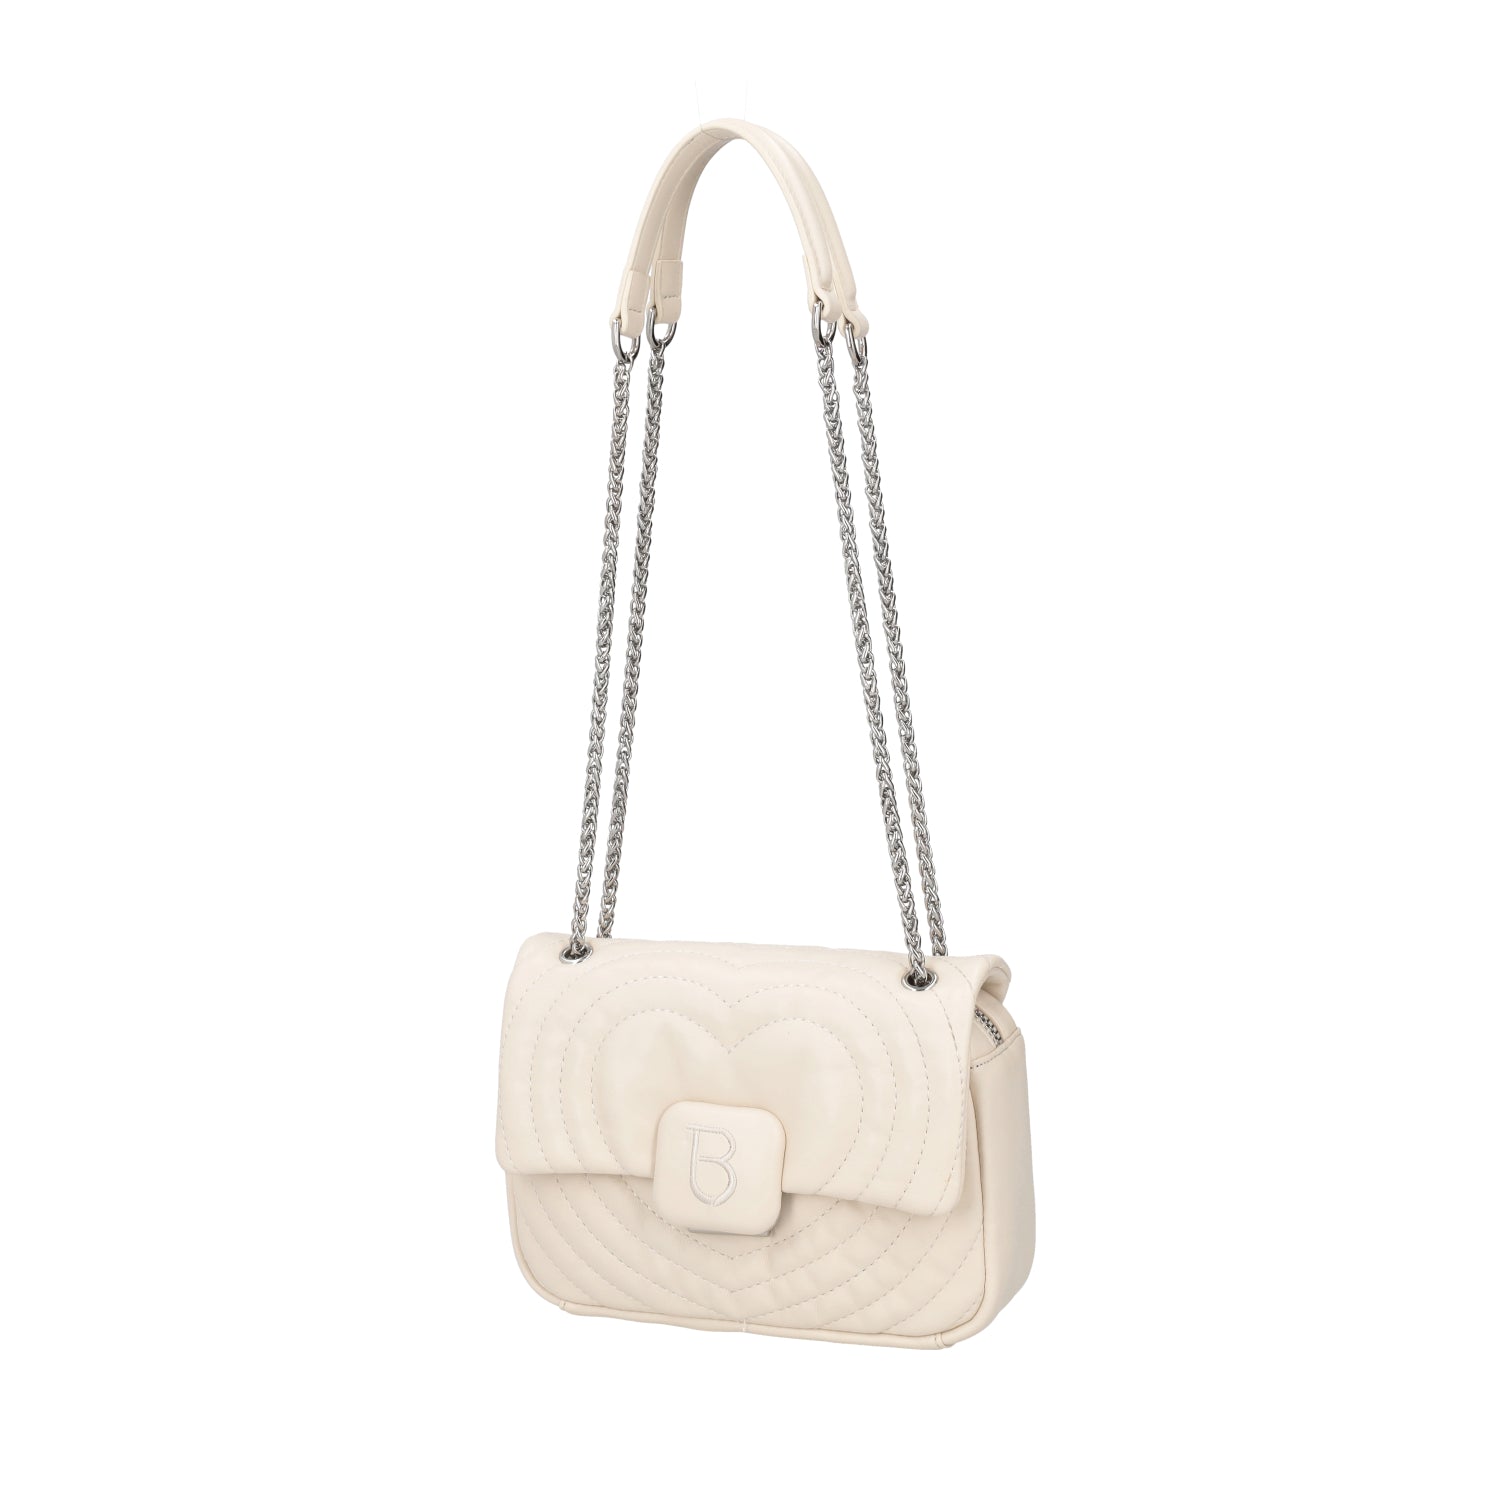 SMALL “SACHER” BAG IN IVORY